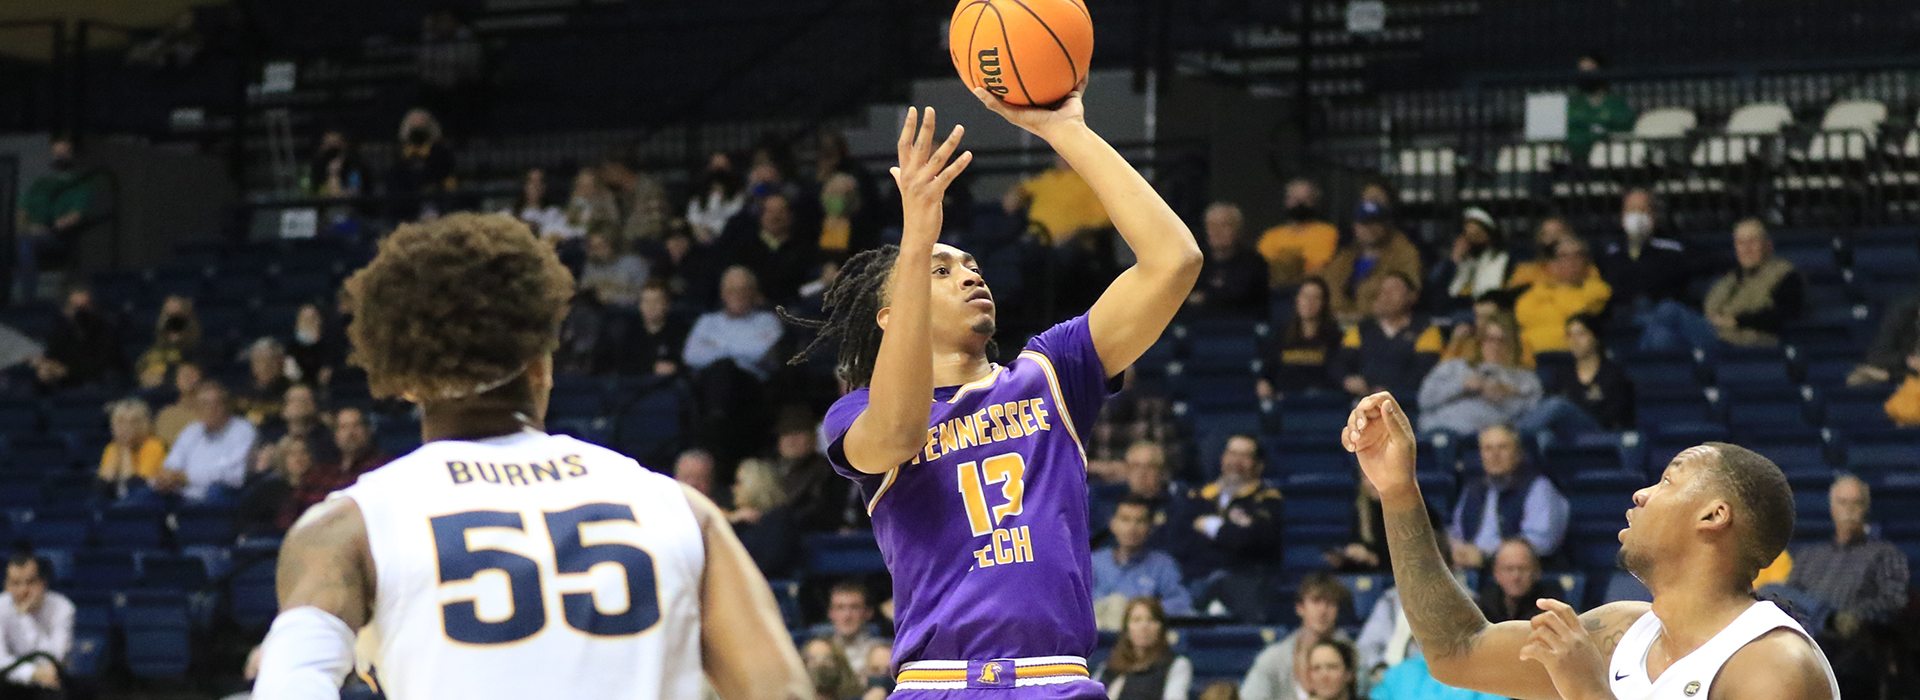 Fast start not enough for Golden Eagles in road loss to red-hot Racers